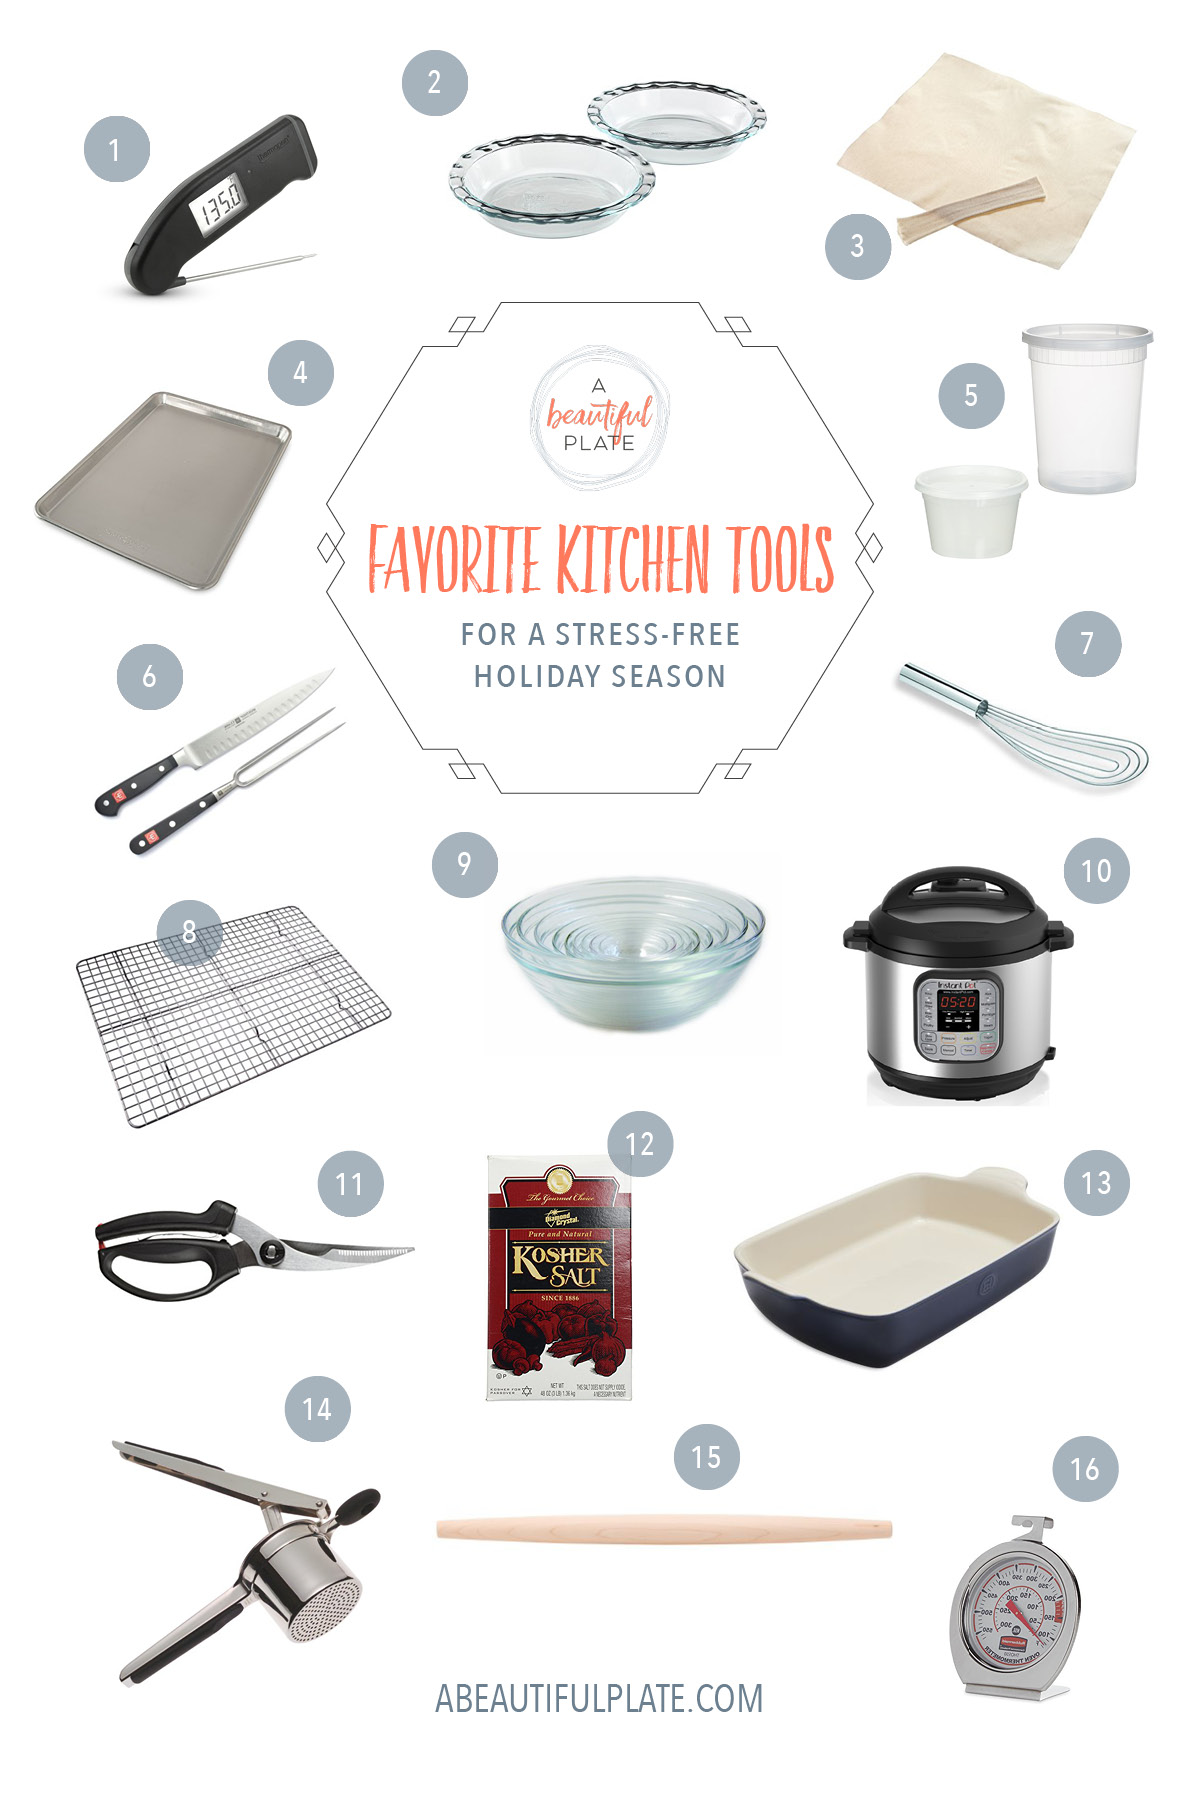 12 of Our Favorite Kitchen Tools Made in the USA